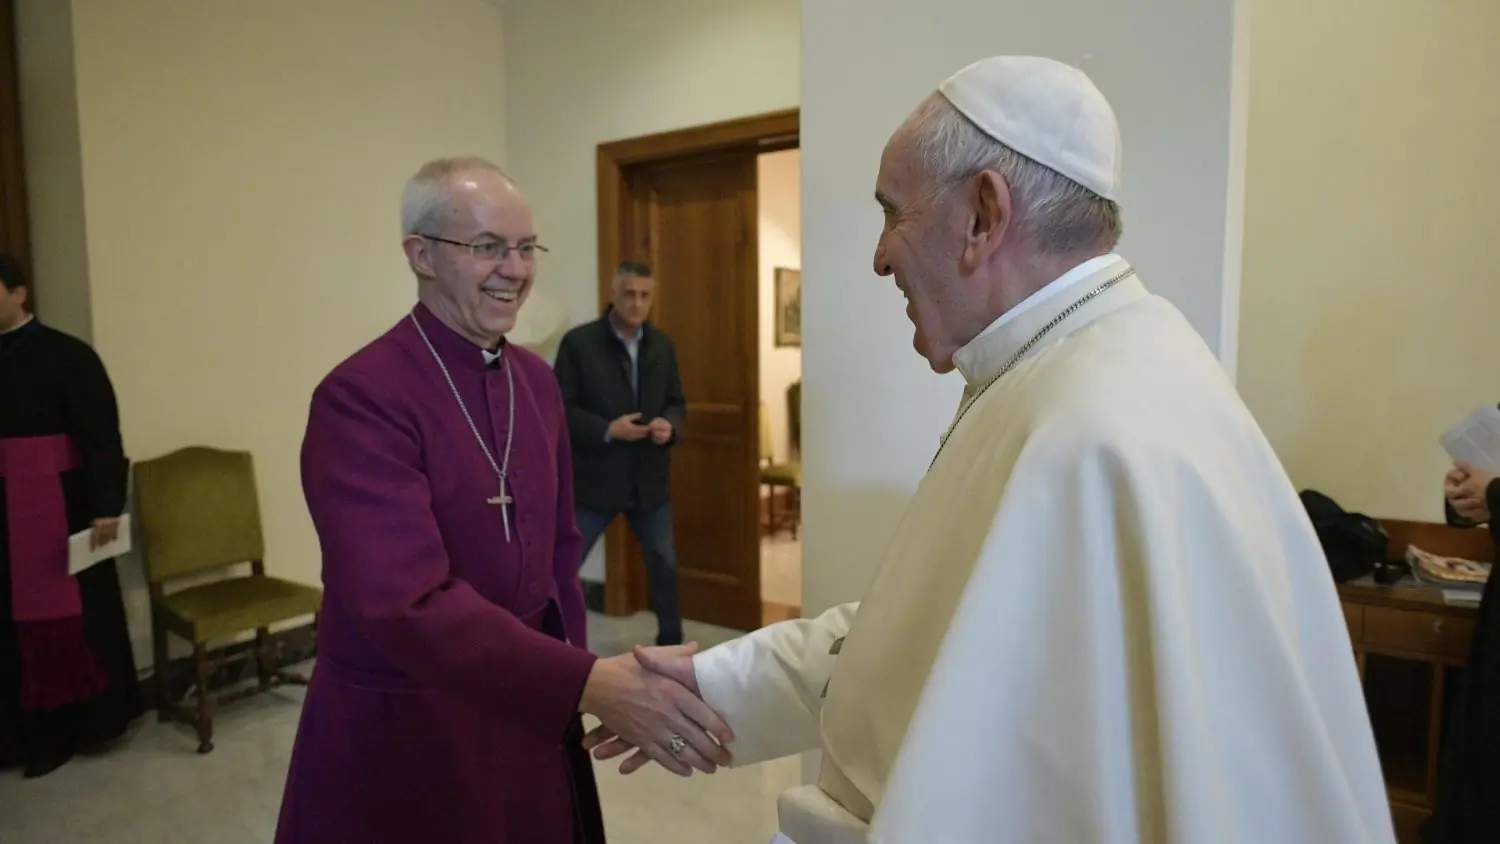 On April 10 and 11, Pope Francis, Archbishop Justin Welby, and Rev. John Chalmers (Church of Scotland) led a retreat for the political and religious leaders of South Sudan